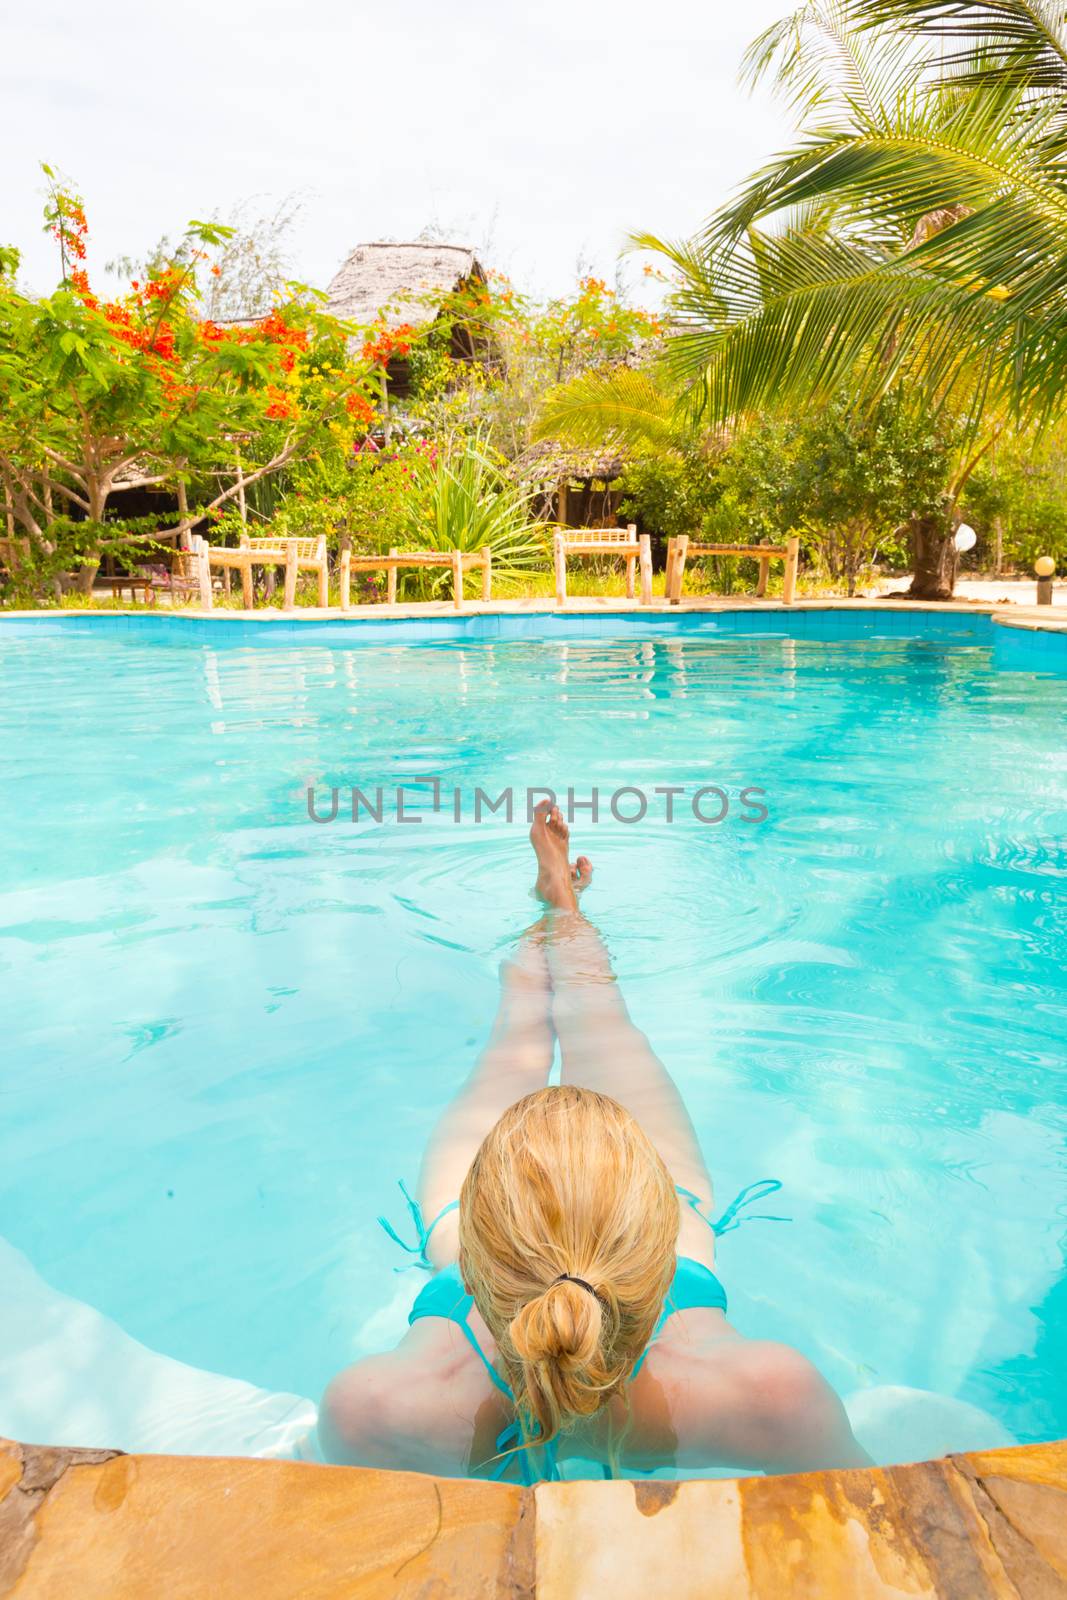 Beautiful Caucasian woman floating in turquoise blue swimming pool.